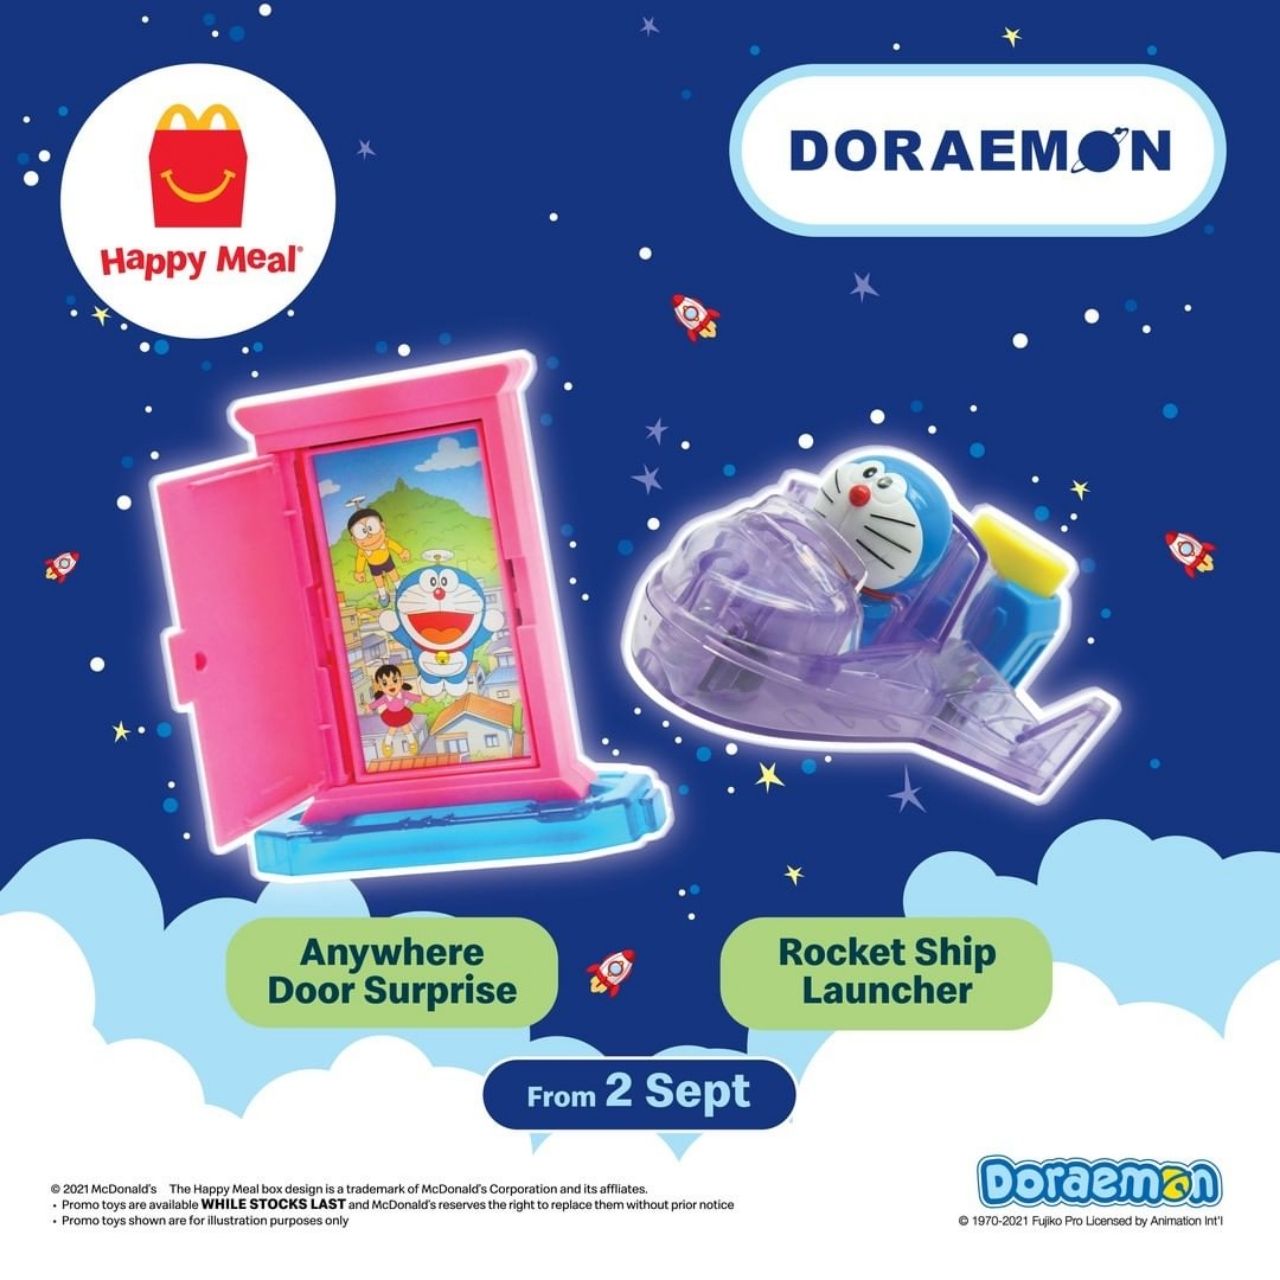 McDonald's Happy Meal Malaysia's Doraemon Toy Collection